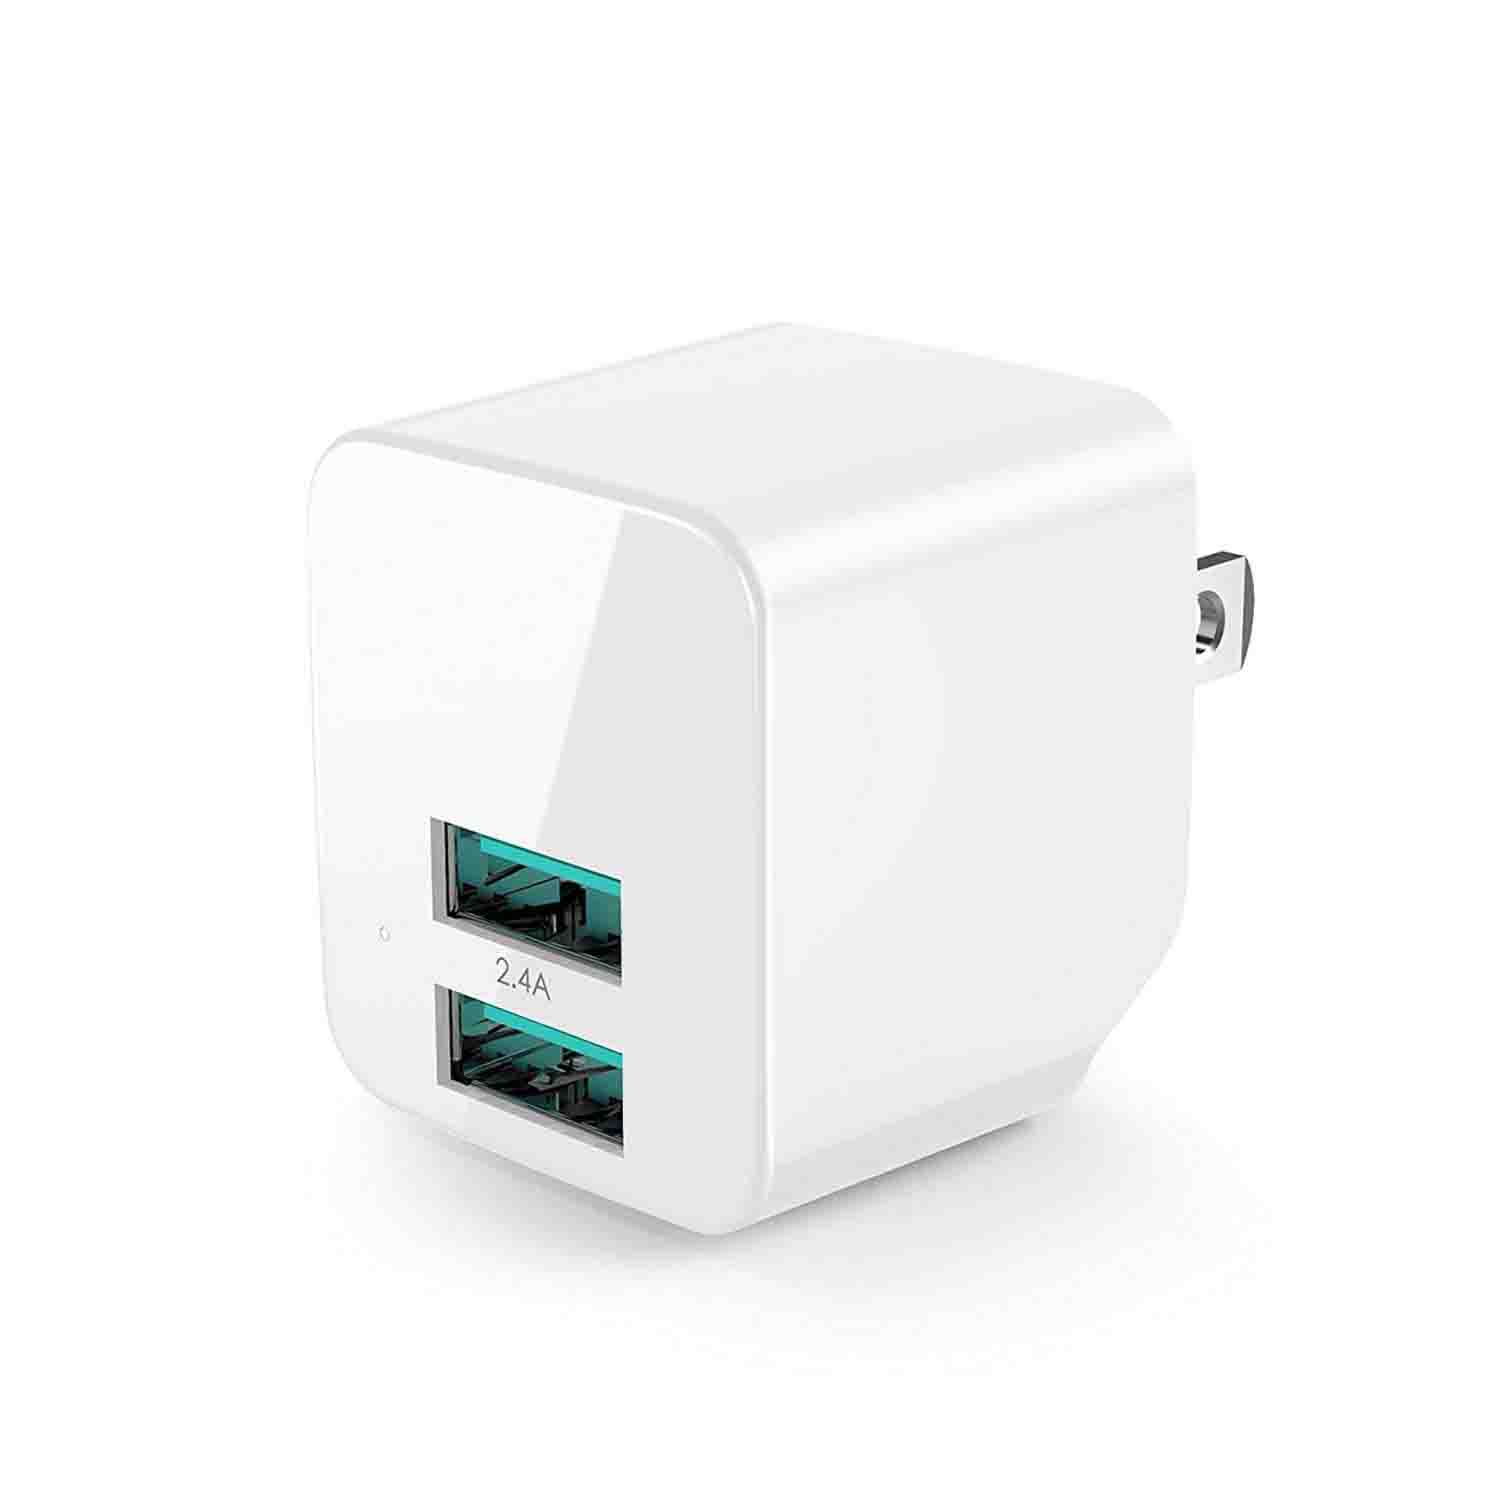 USB Wall Charger, Dual Port 2.4A Output 